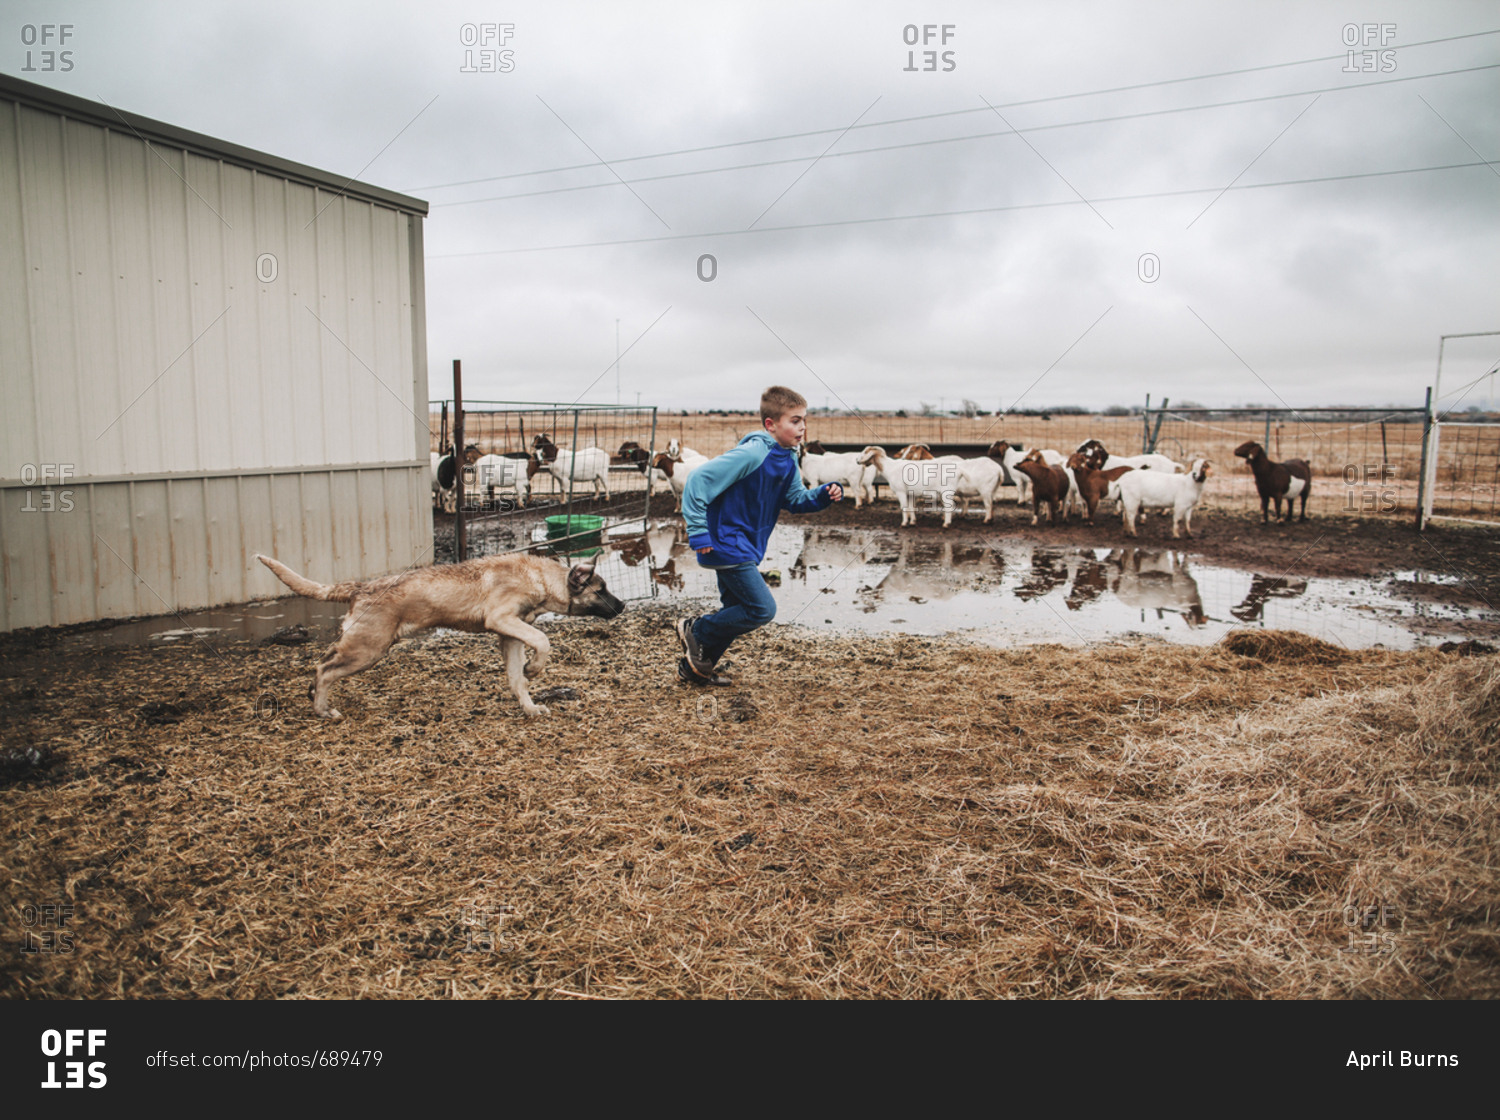 A boy and his dog running in a goat pen